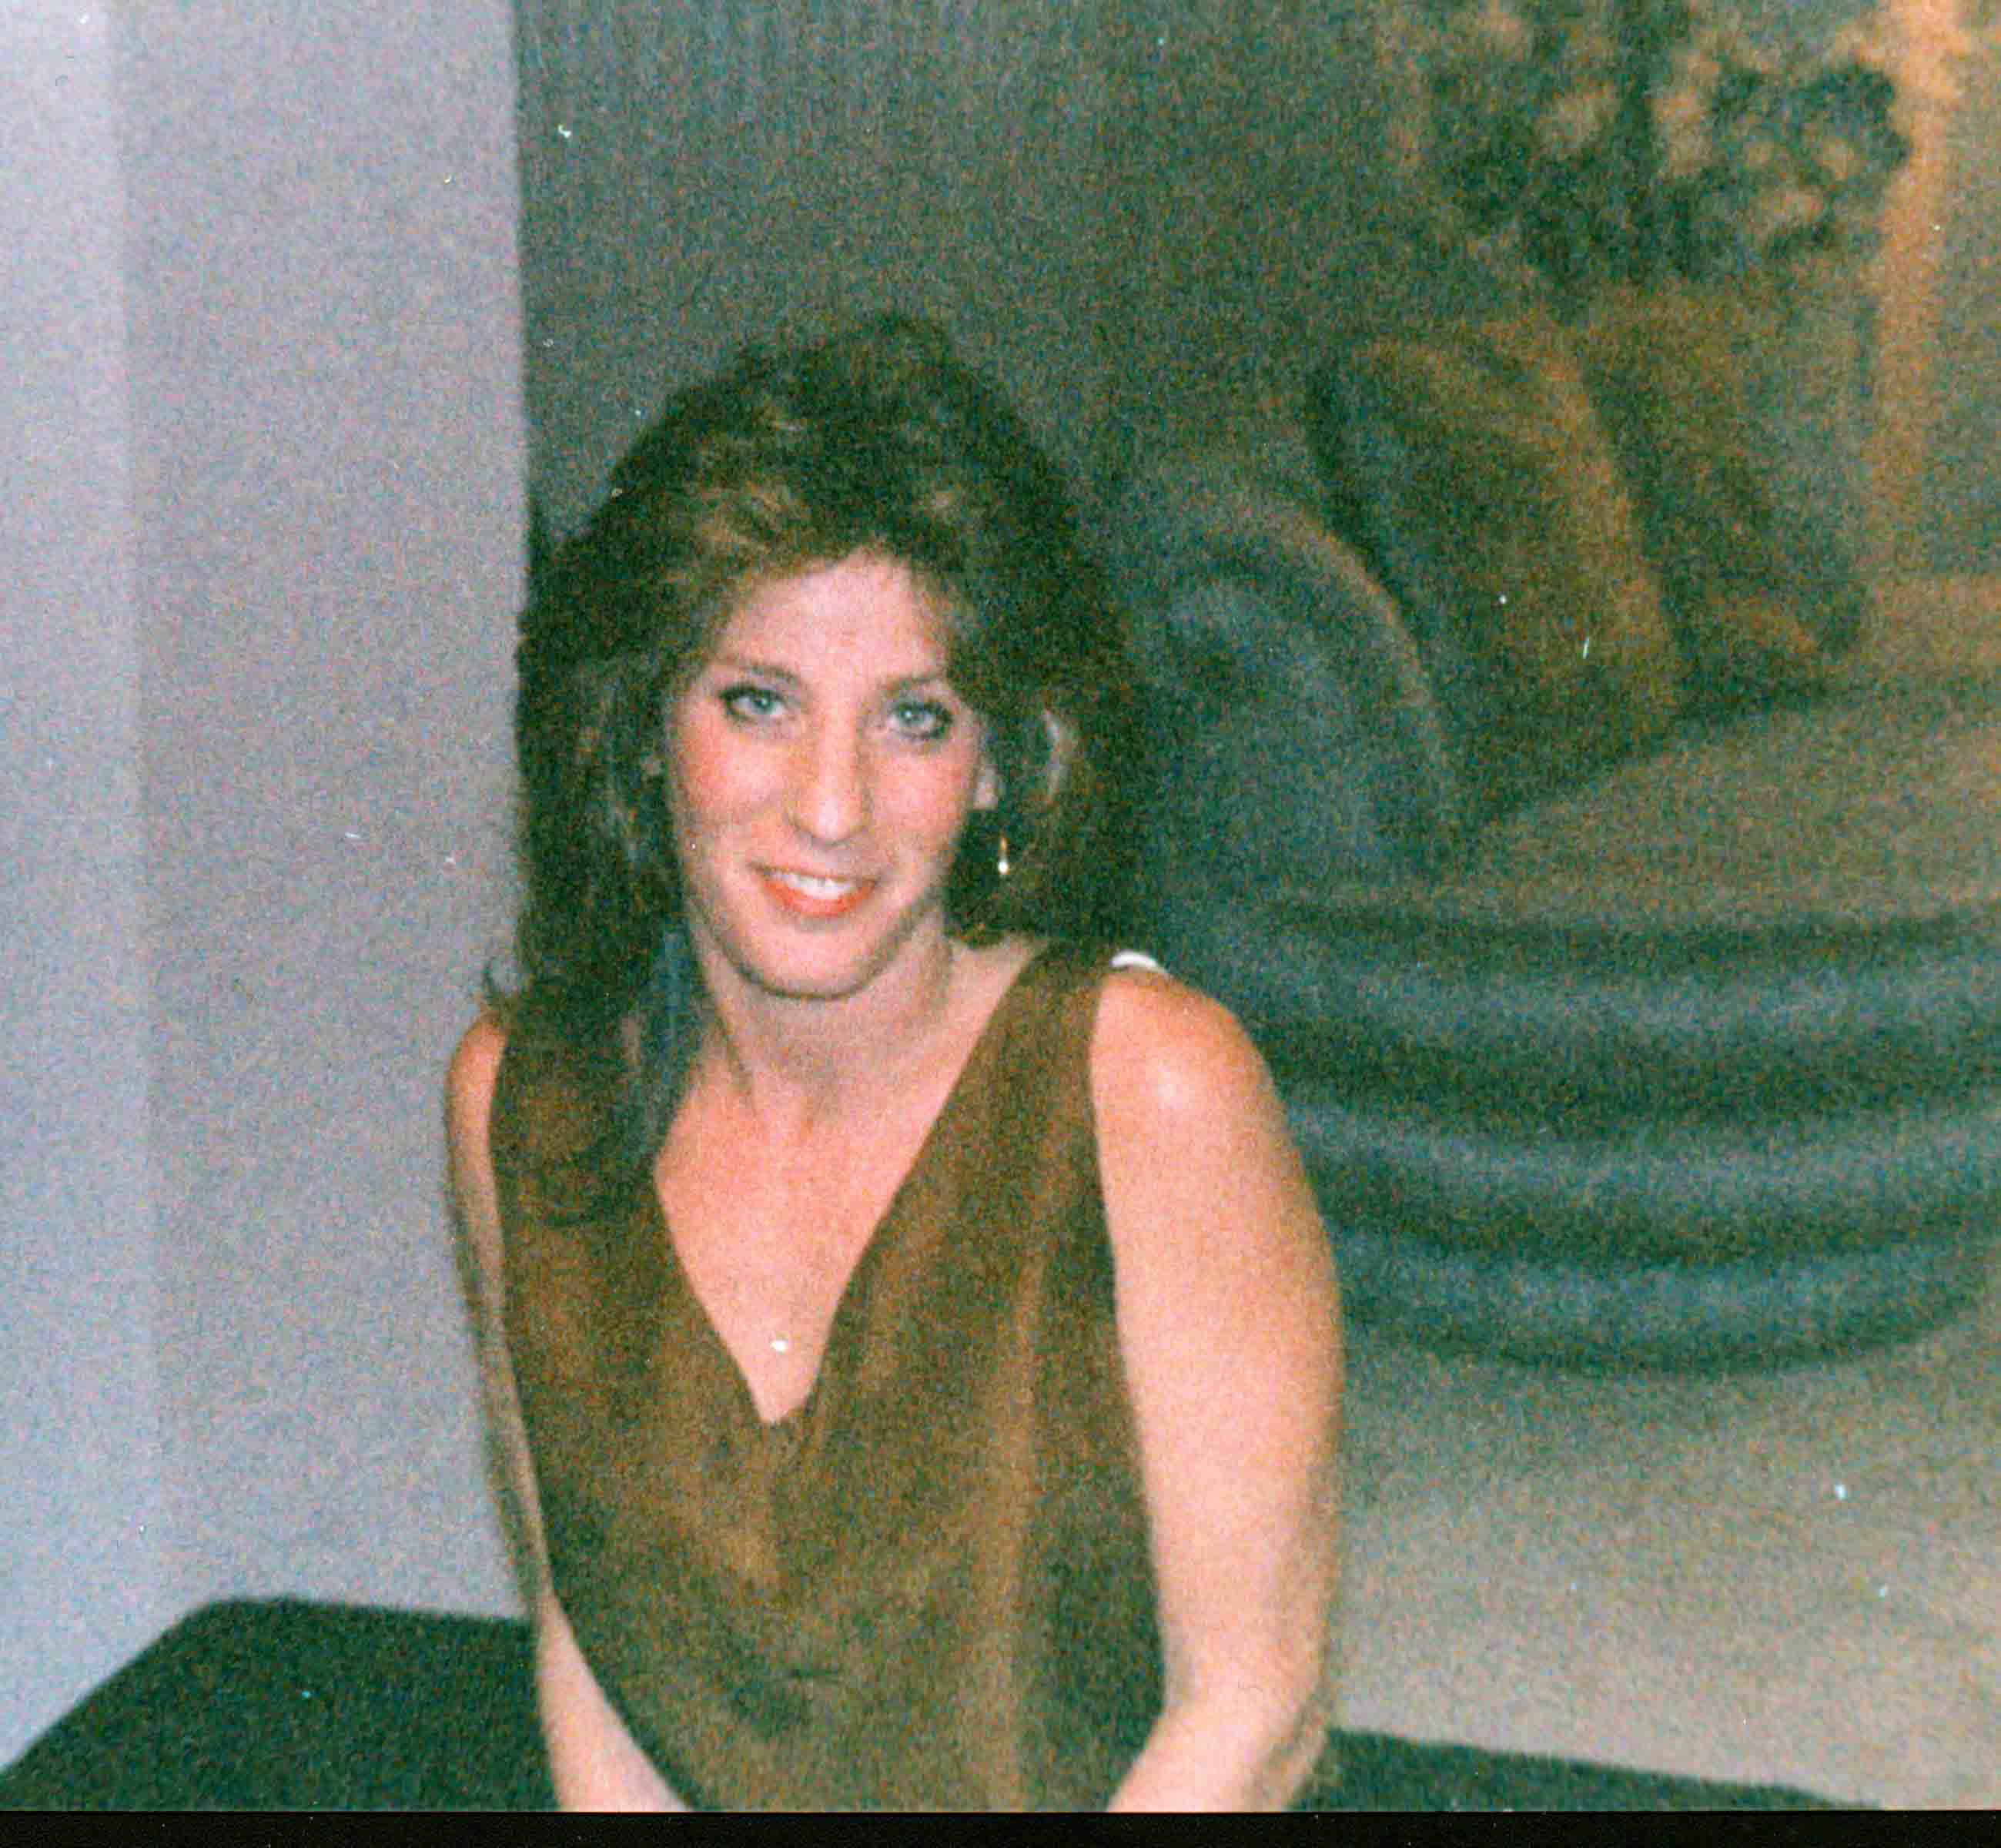 Michelle Lisa Adler 9/22/69 - 4/7/03 (A Charger from the Class of 1987.)